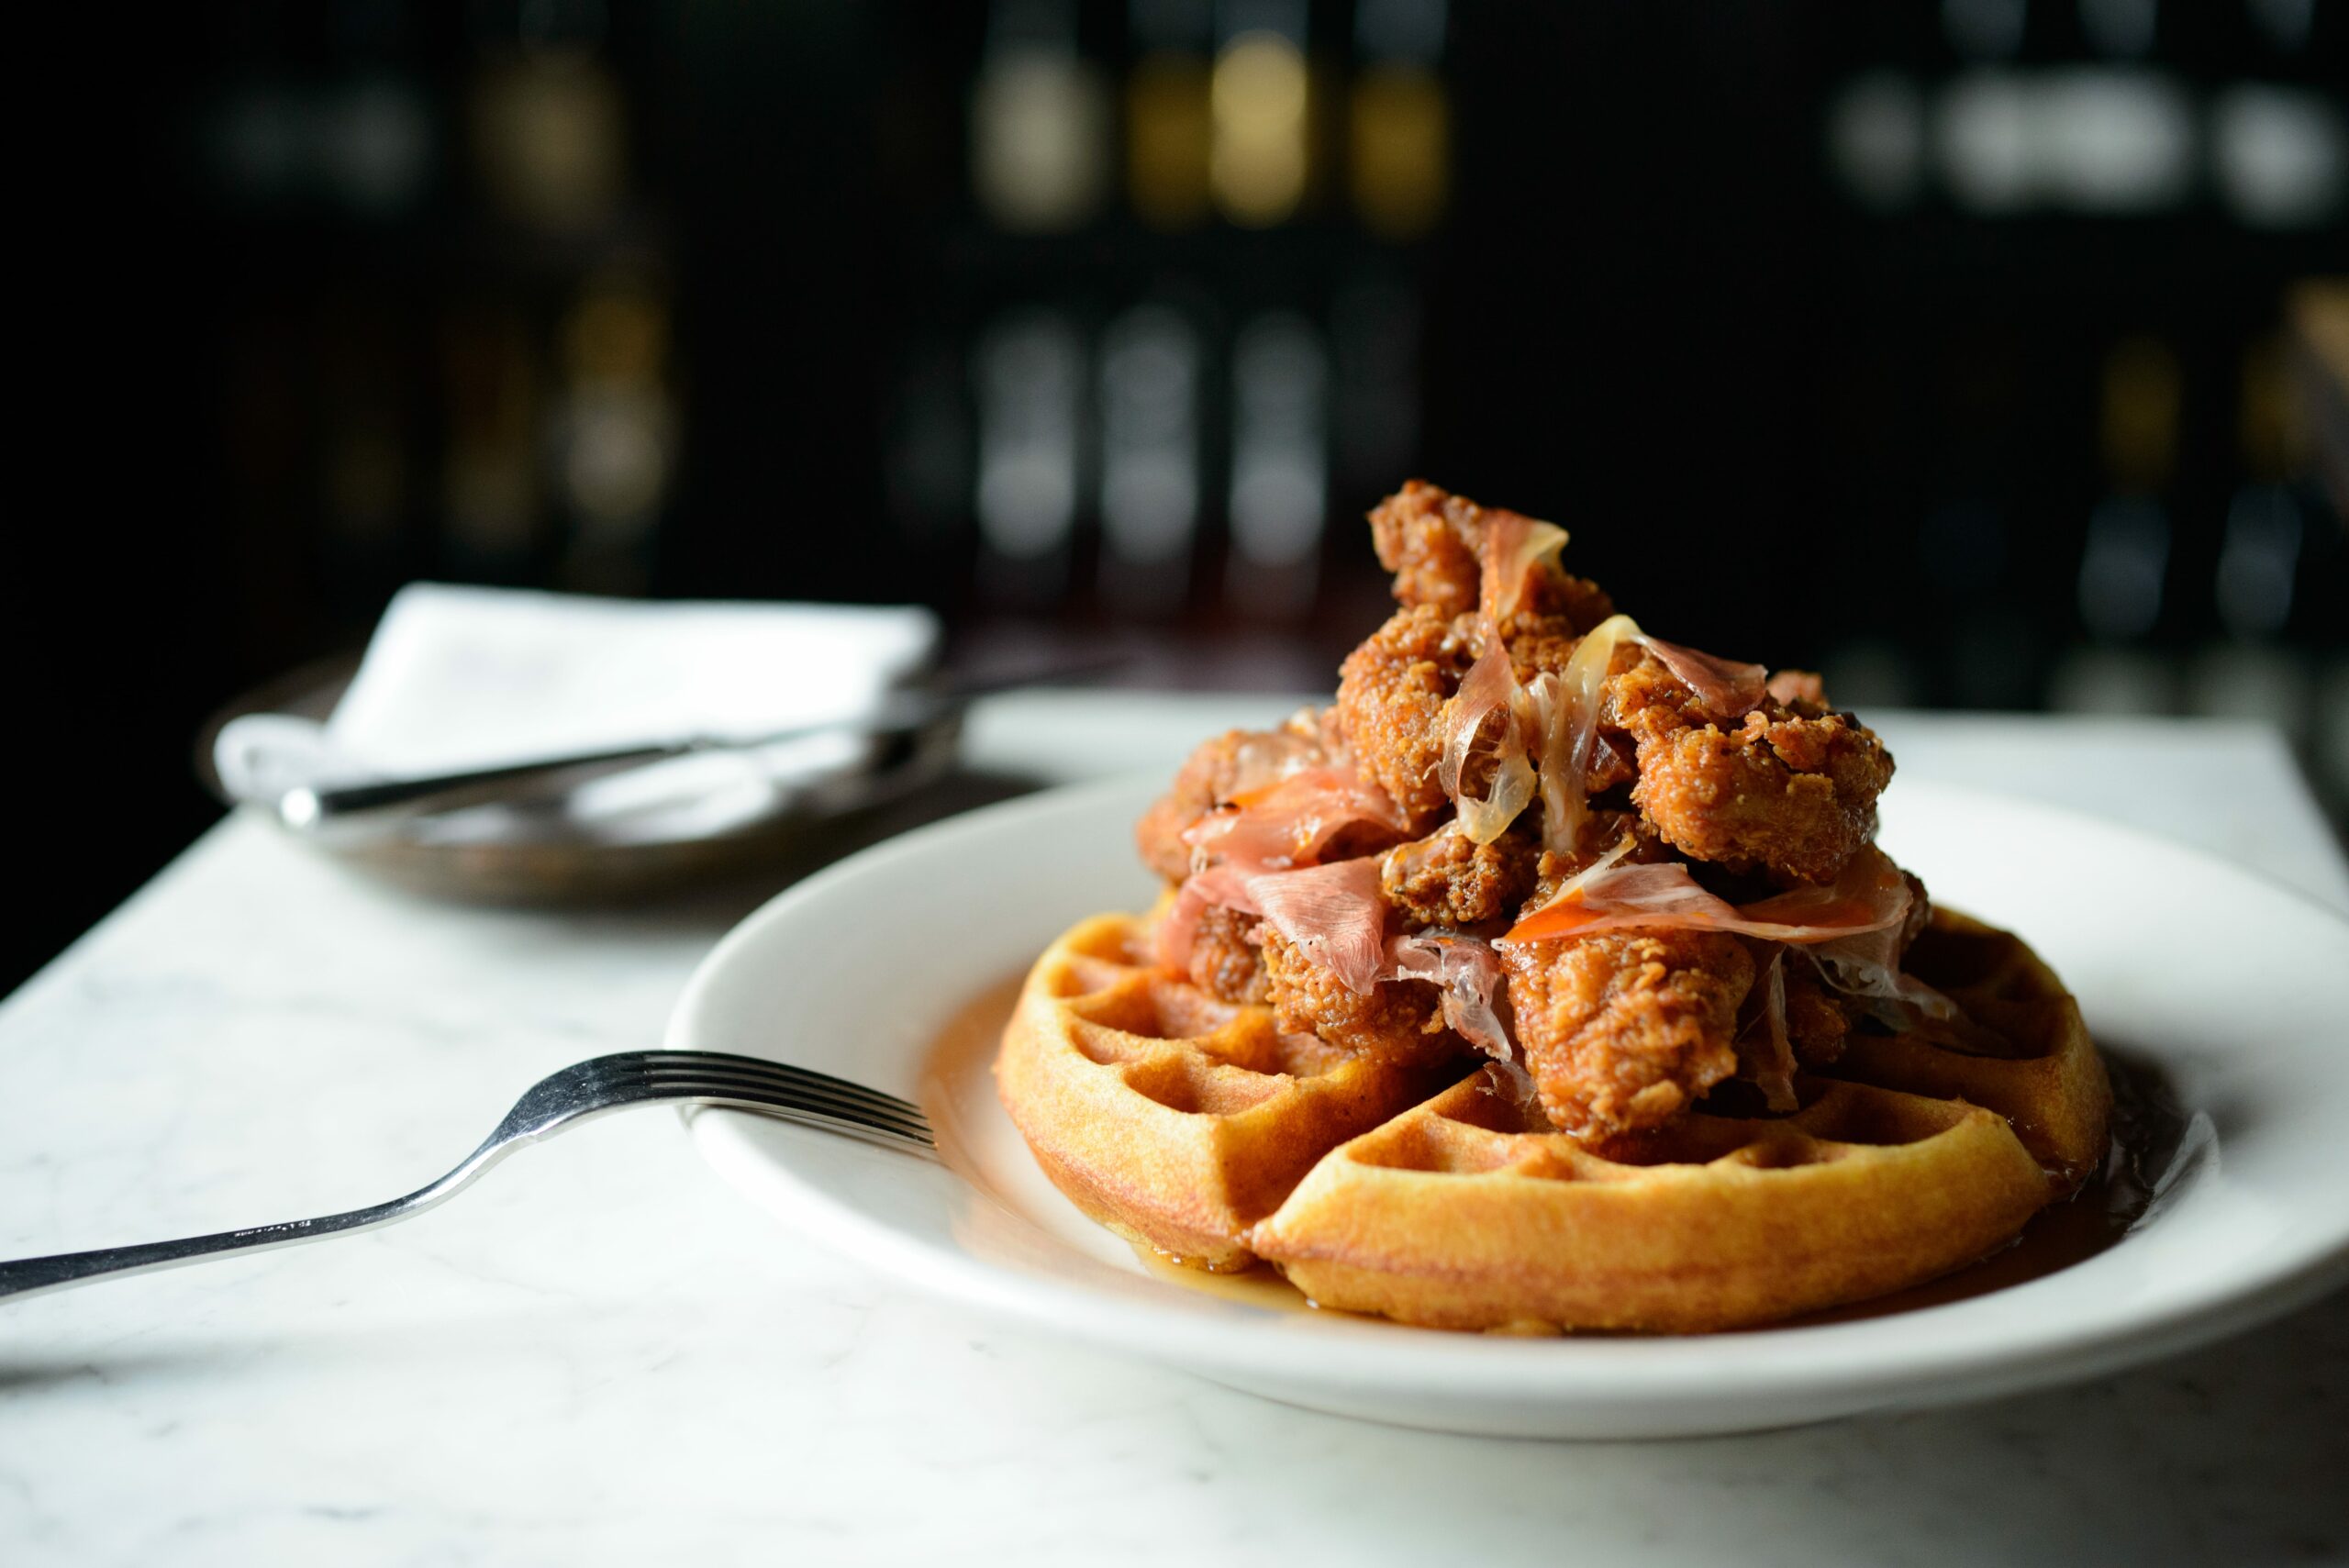 An image of the Spanish Fried Chicken & Cornmeal Waffle with Chile-Cumin Butter from A.O.C.